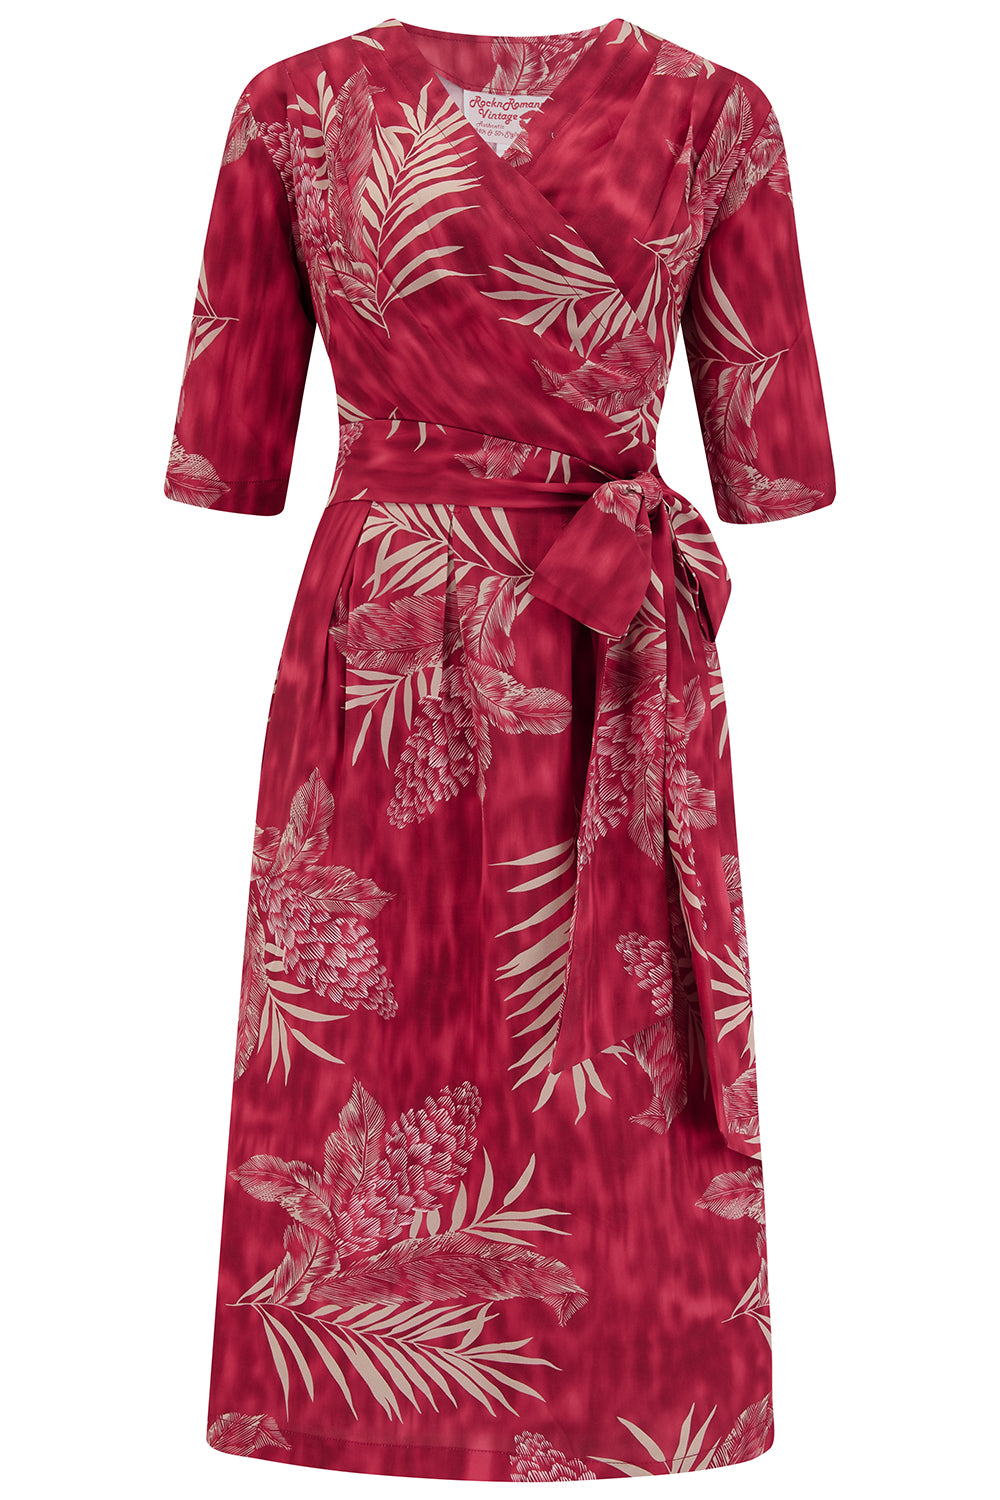 The "Vivien" Full Wrap Dress in Ruby Palm, True 1940s To Early 1950s Style